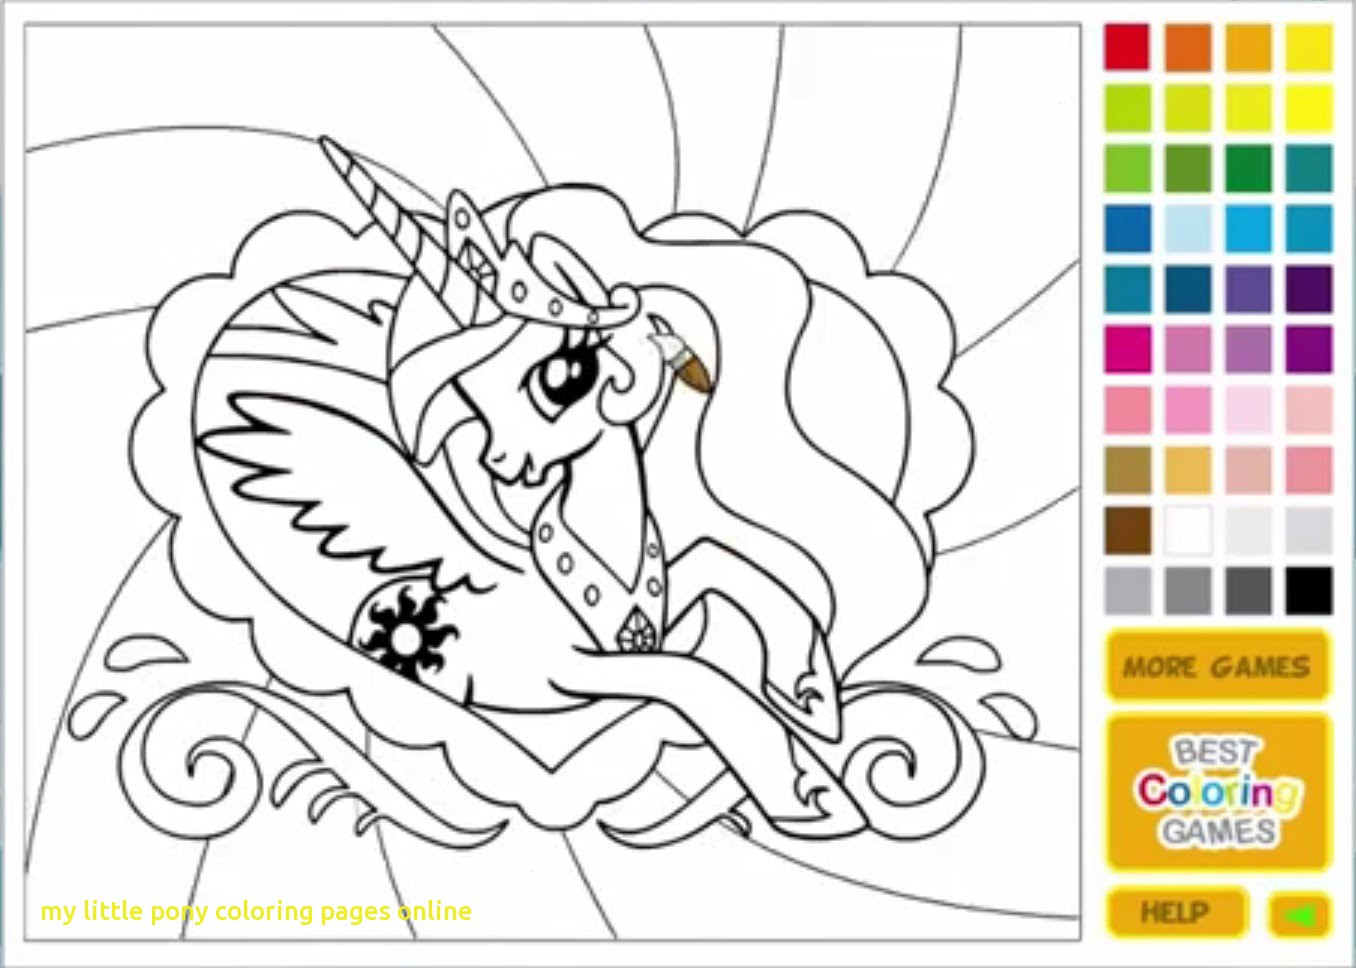 Coloring Pages To Color Online
 My Little Pony Coloring Pages line